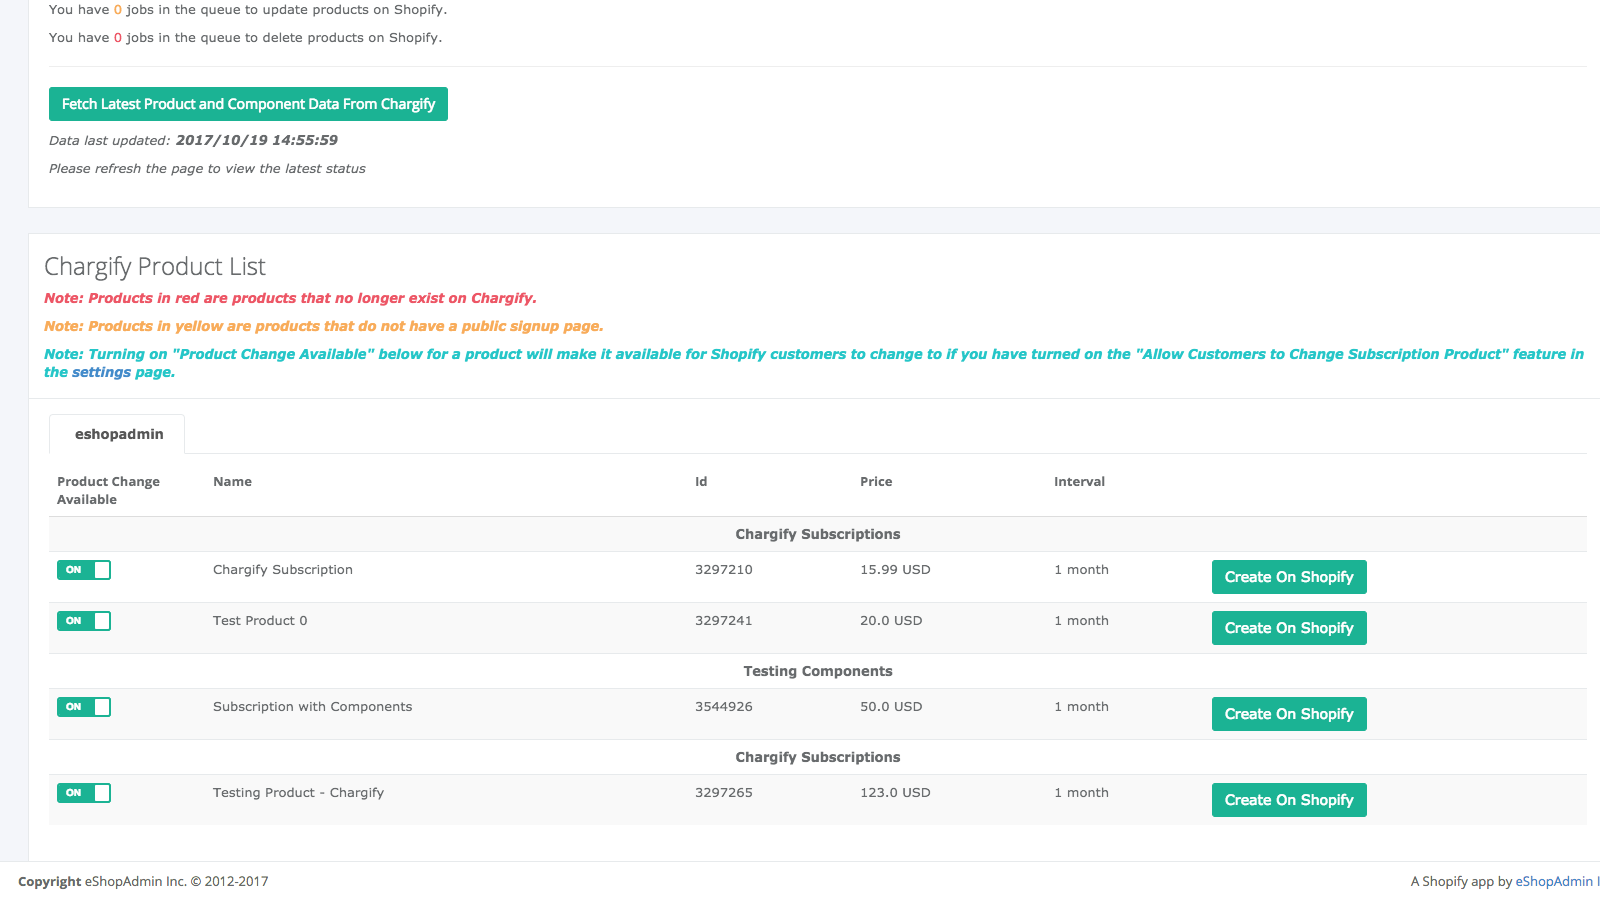 Manage your Chargify product list